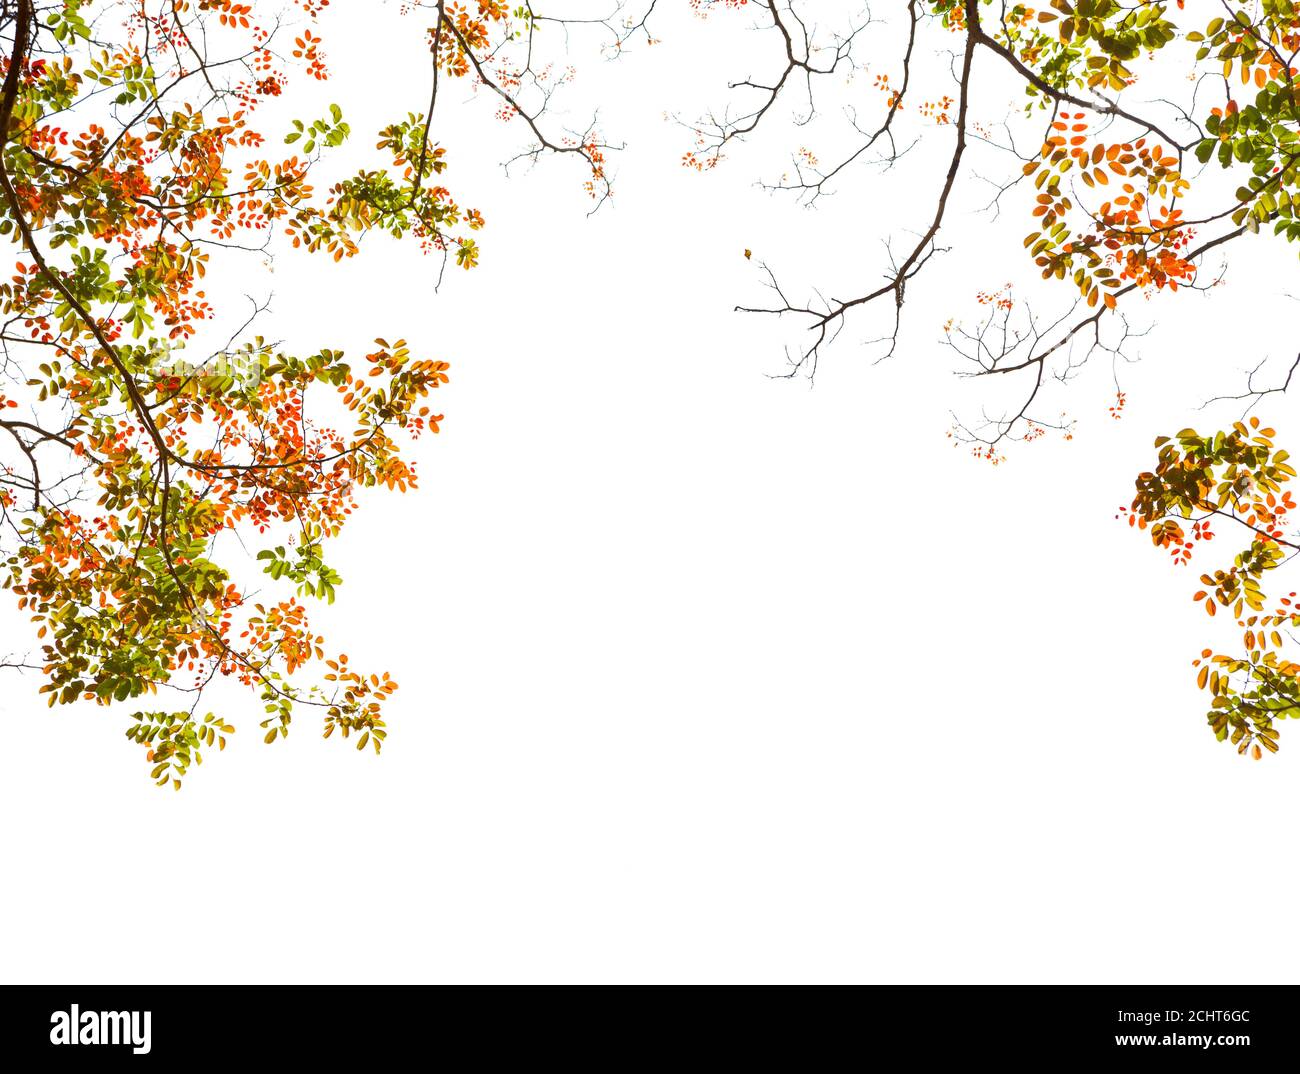 Branches with colorful autumn leaves  isolated on white background. Acacia. Stock Photo